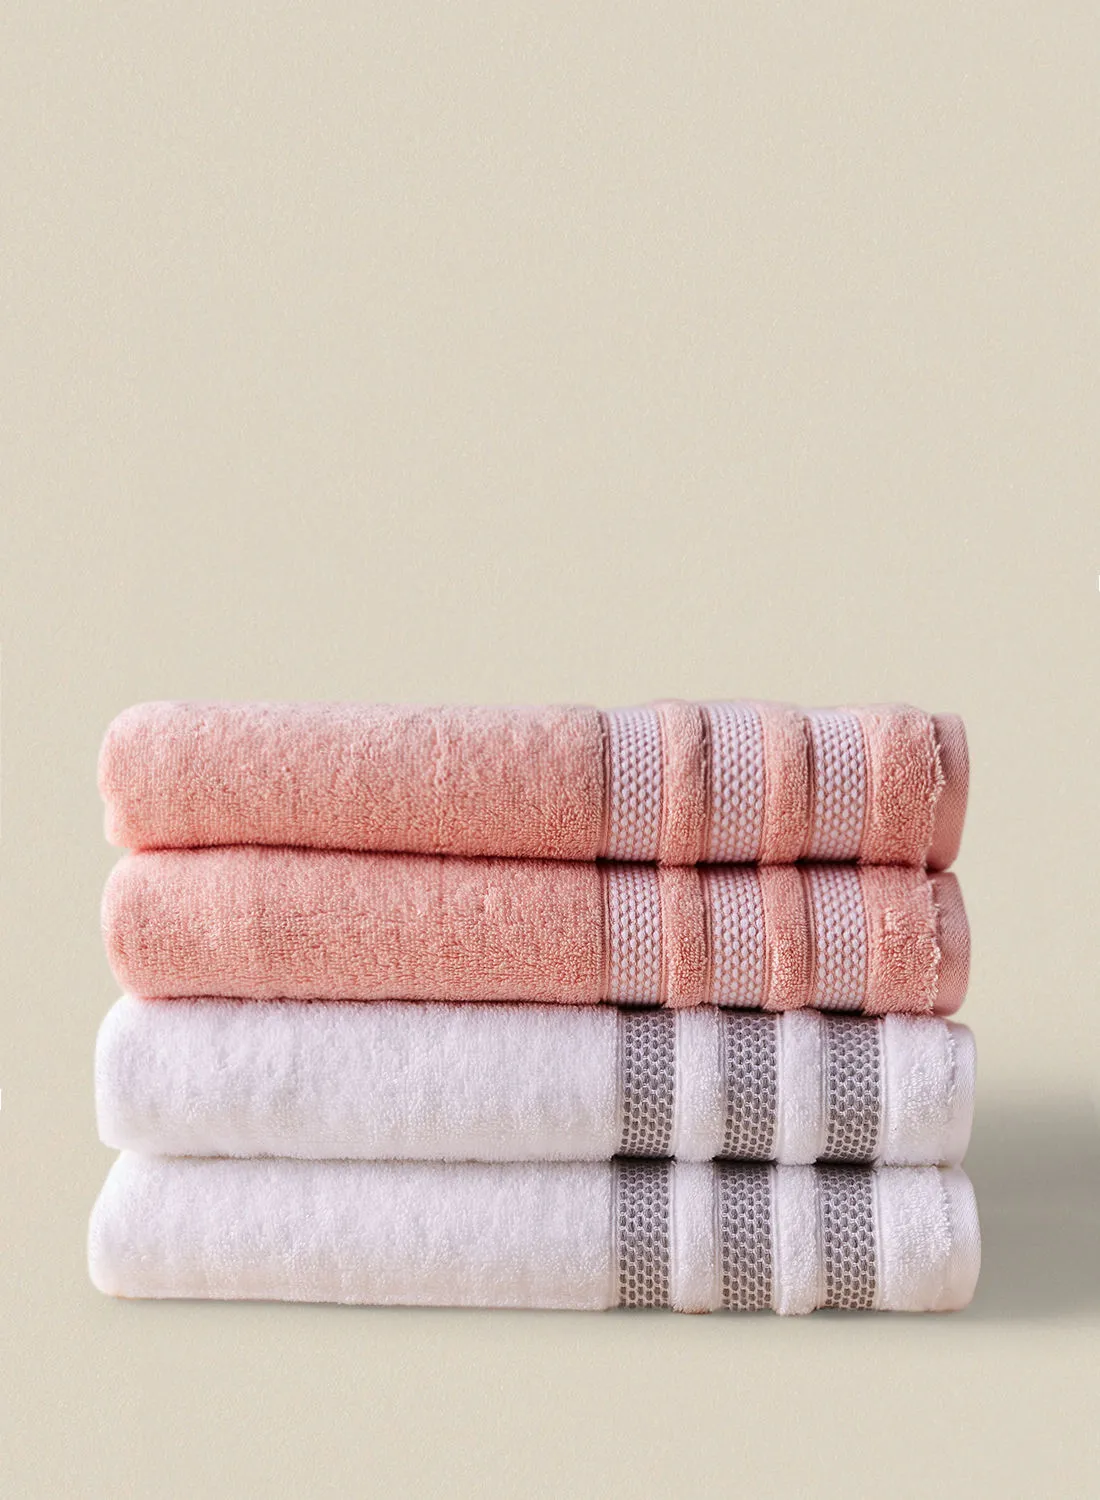 noon east 4 Piece Bathroom Towel Set - 500 GSM 100% Cotton Low Twist - 4 Bath Towel - Multicolor White/Coral Color - Highly Absorbent - Fast Dry